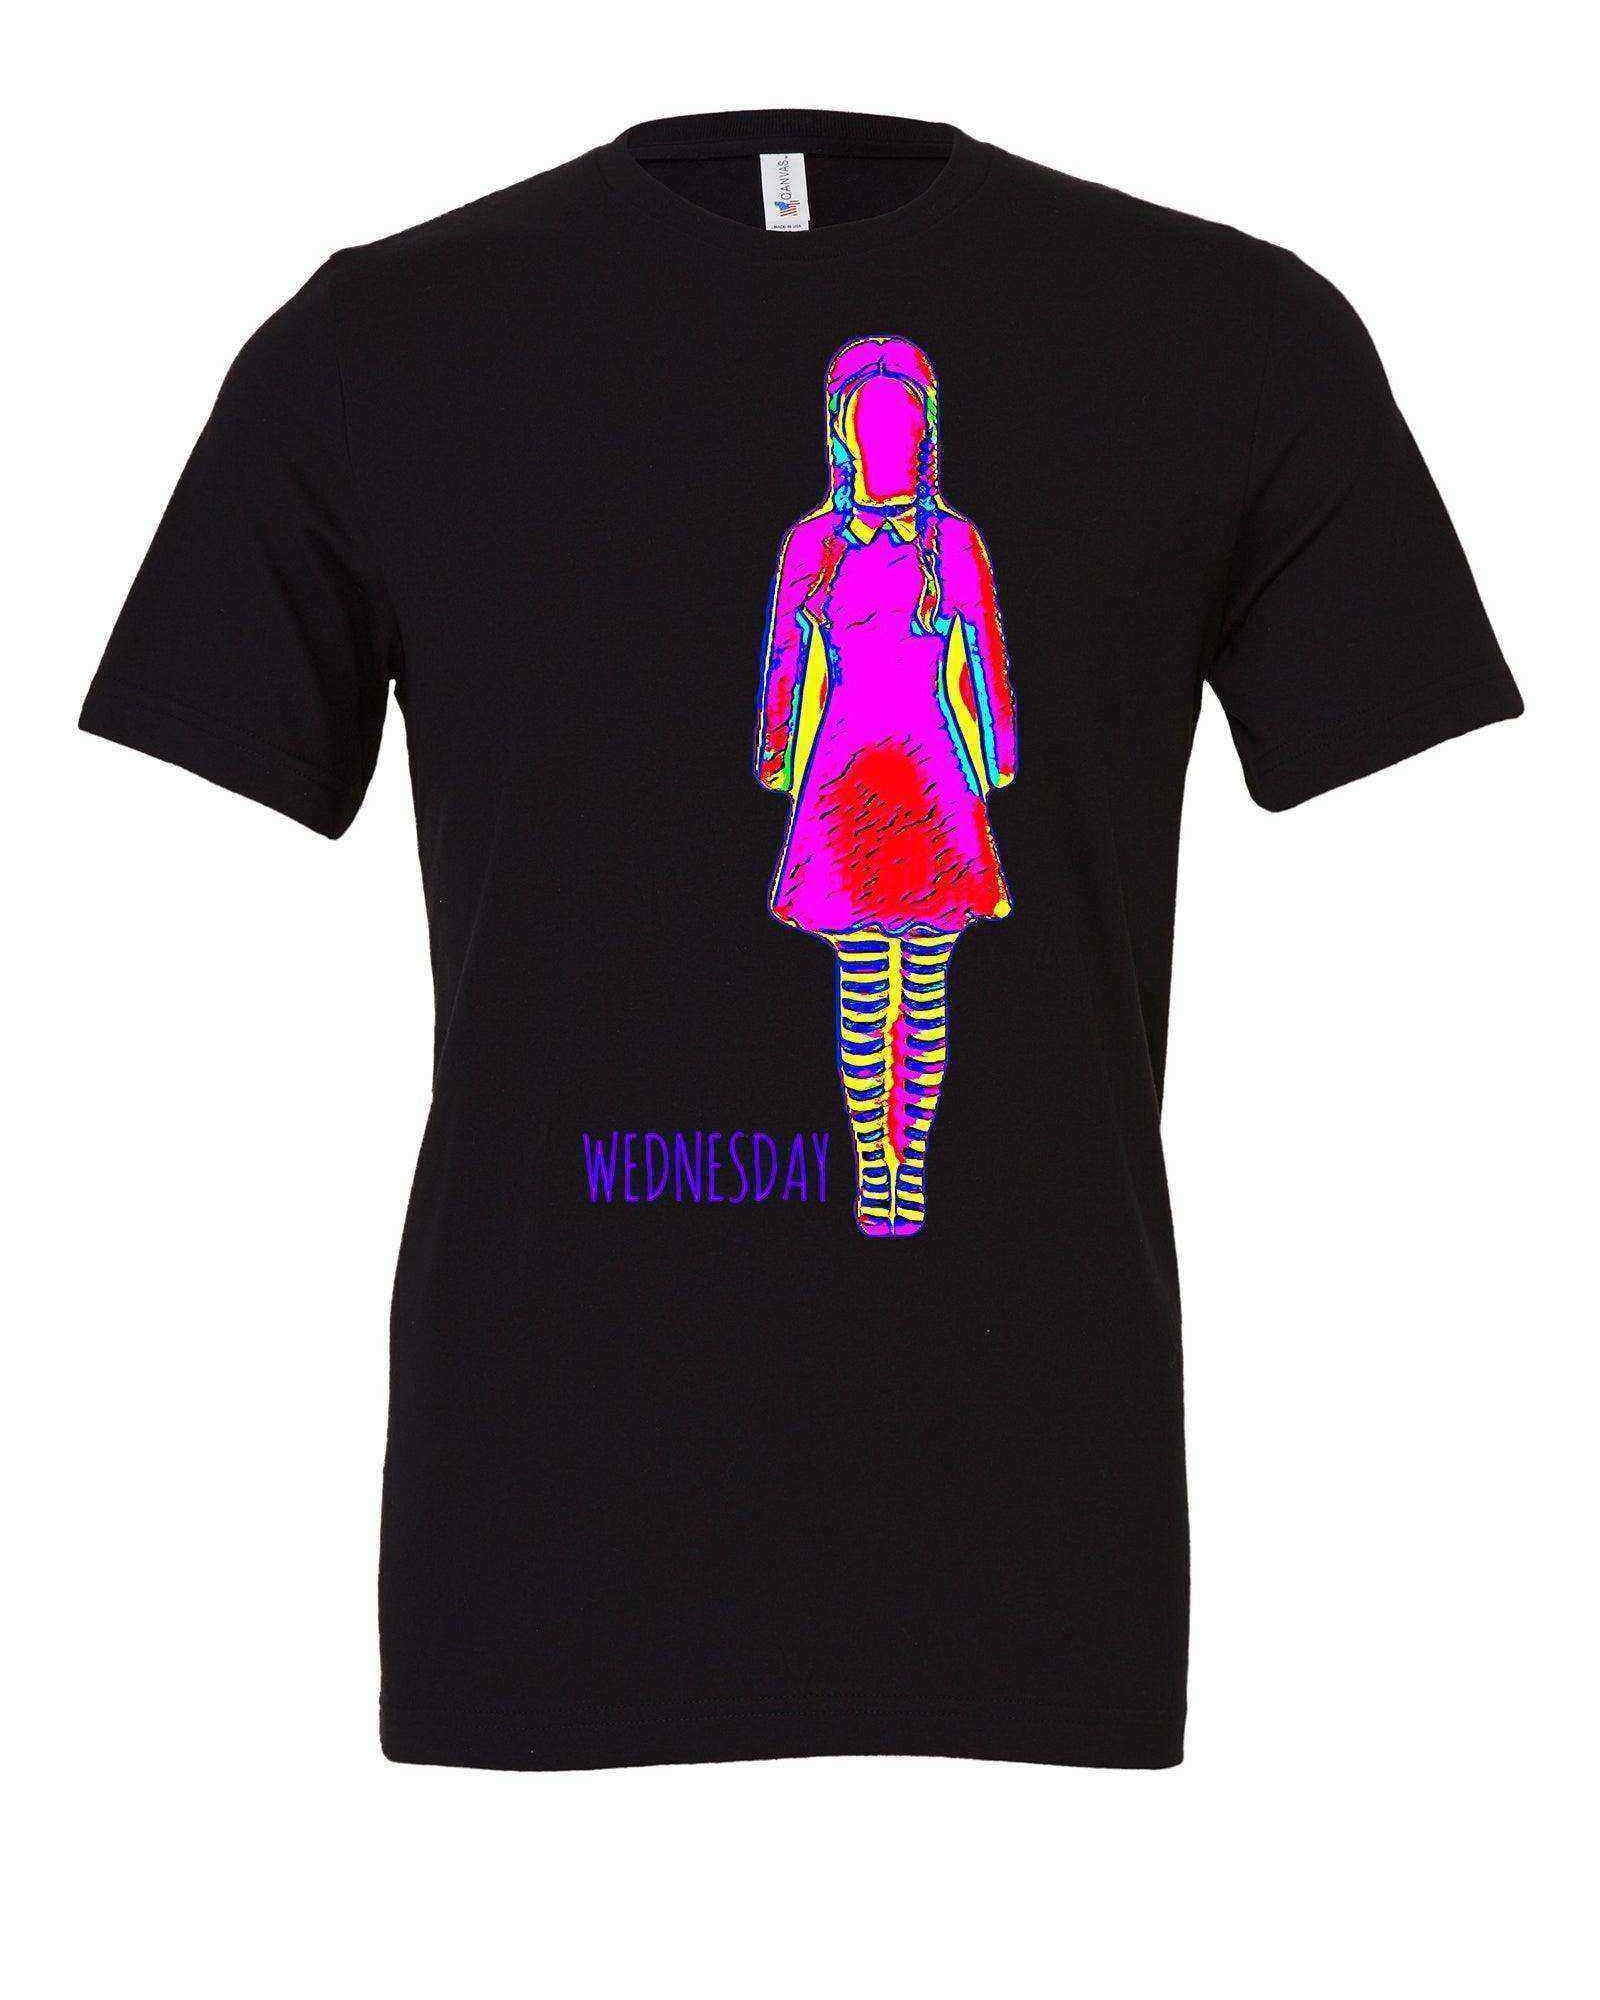 Youth | Neon Wednesday Shirt | Wednesday Shirts | Addams Shirt - Dylan's Tees